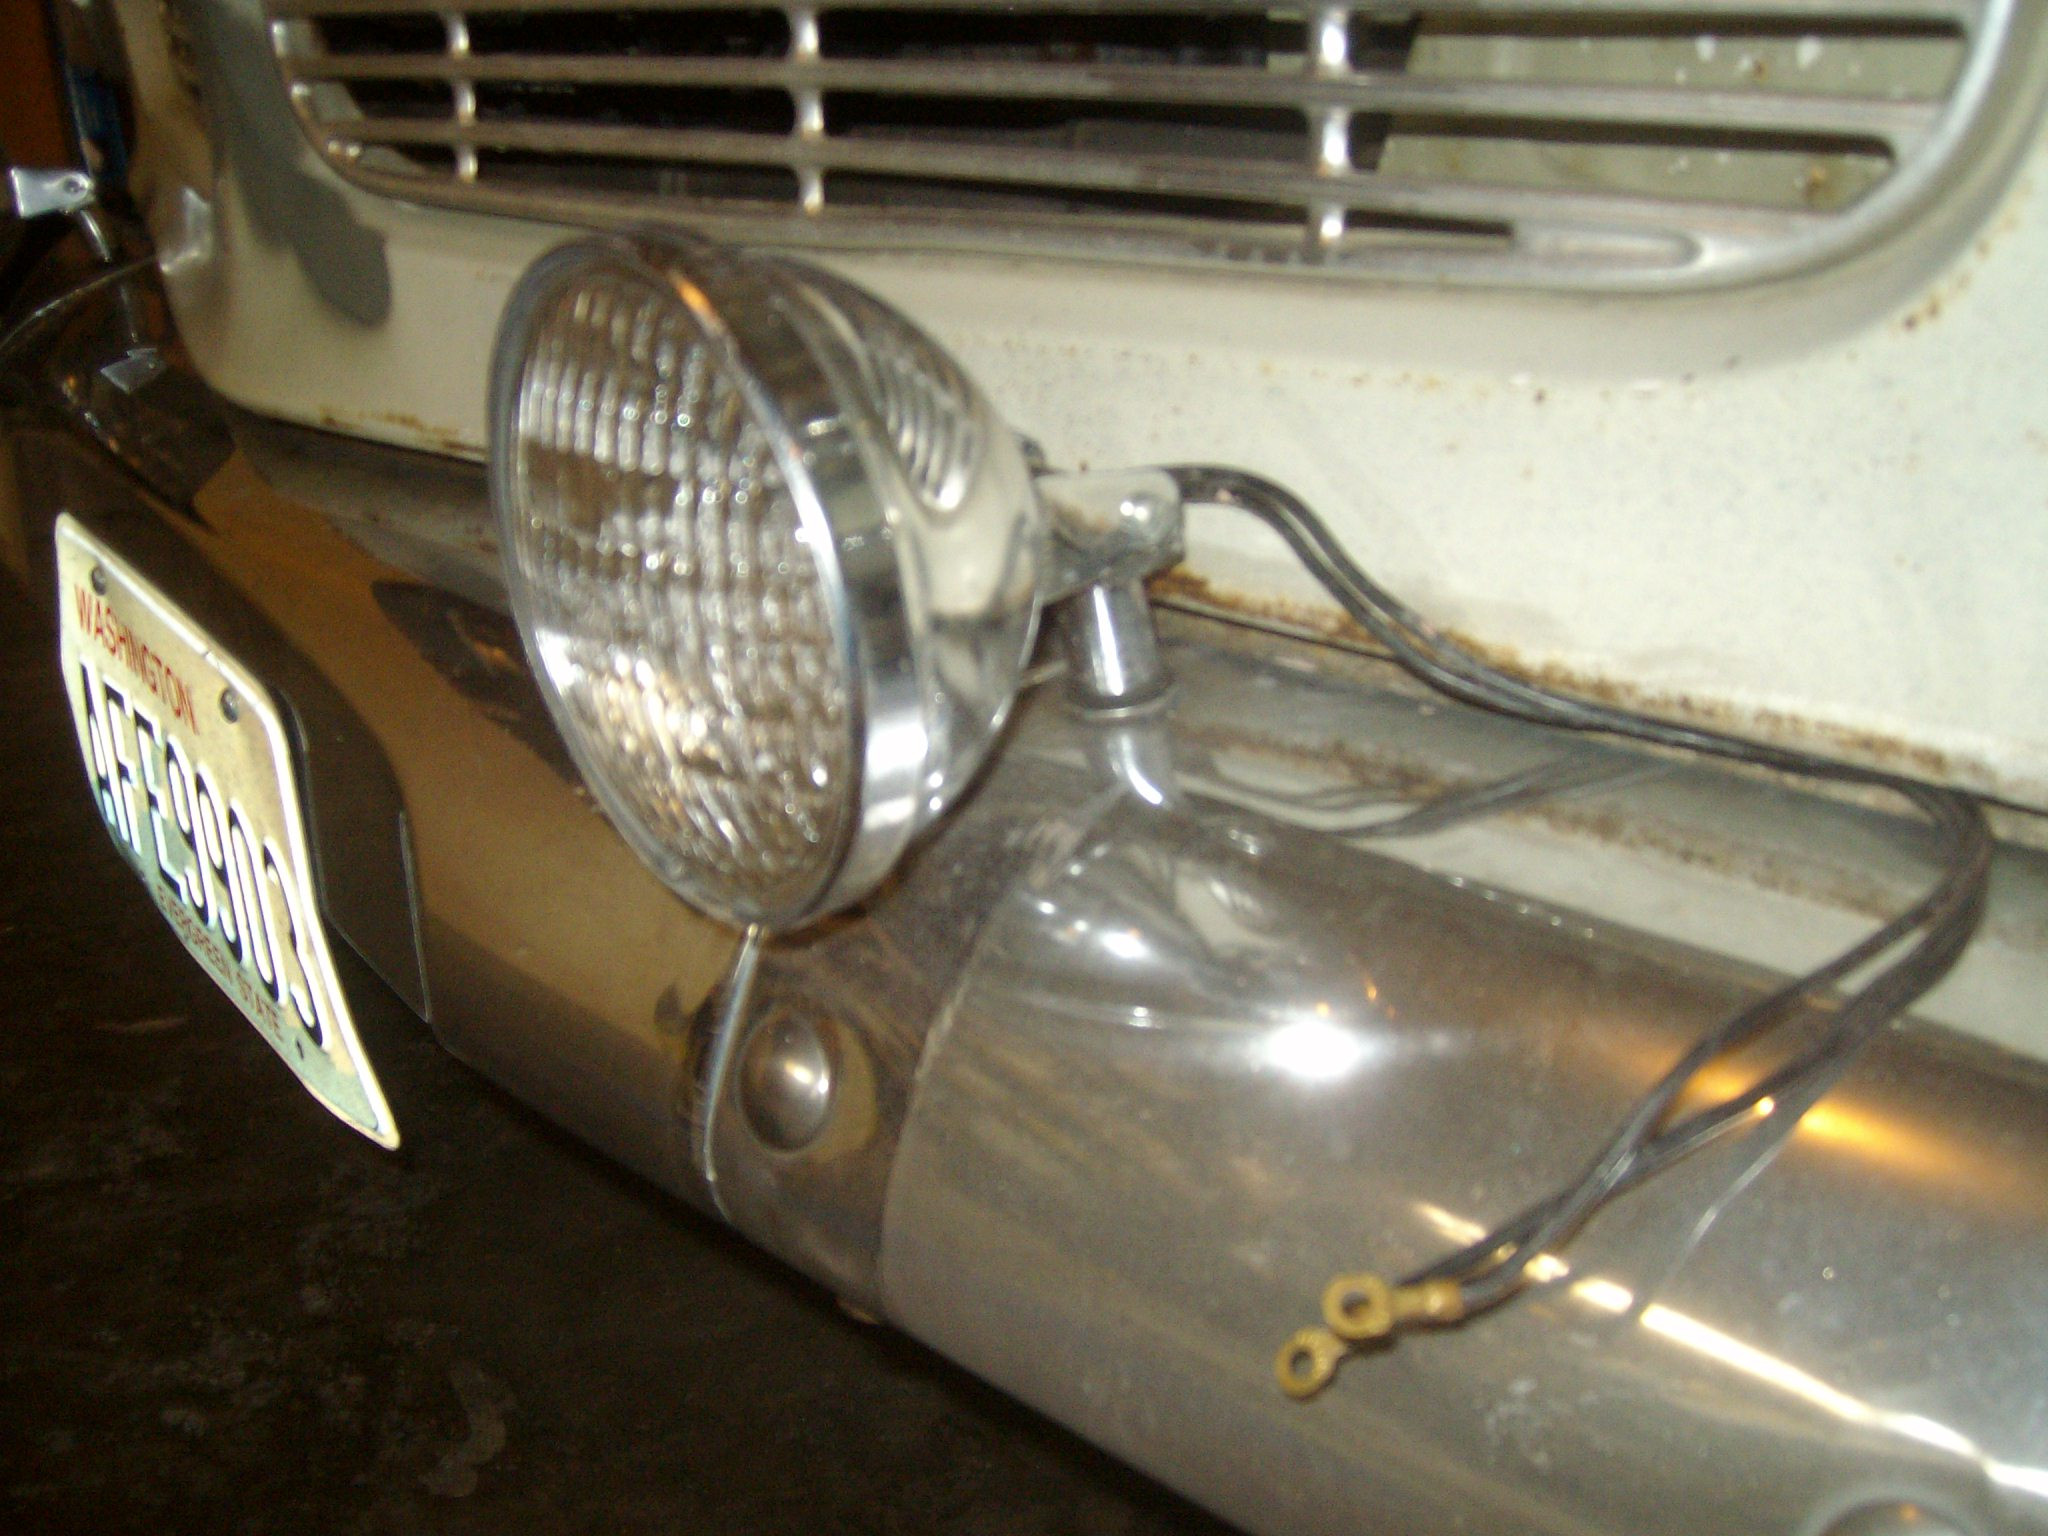 Add Fog Lamps to Classic Car by Relay Wiring How to Wire Driving / Fog Lights (www.mossmotors.com) â Mogsouth Of Add Fog Lamps to Classic Car by Relay Wiring